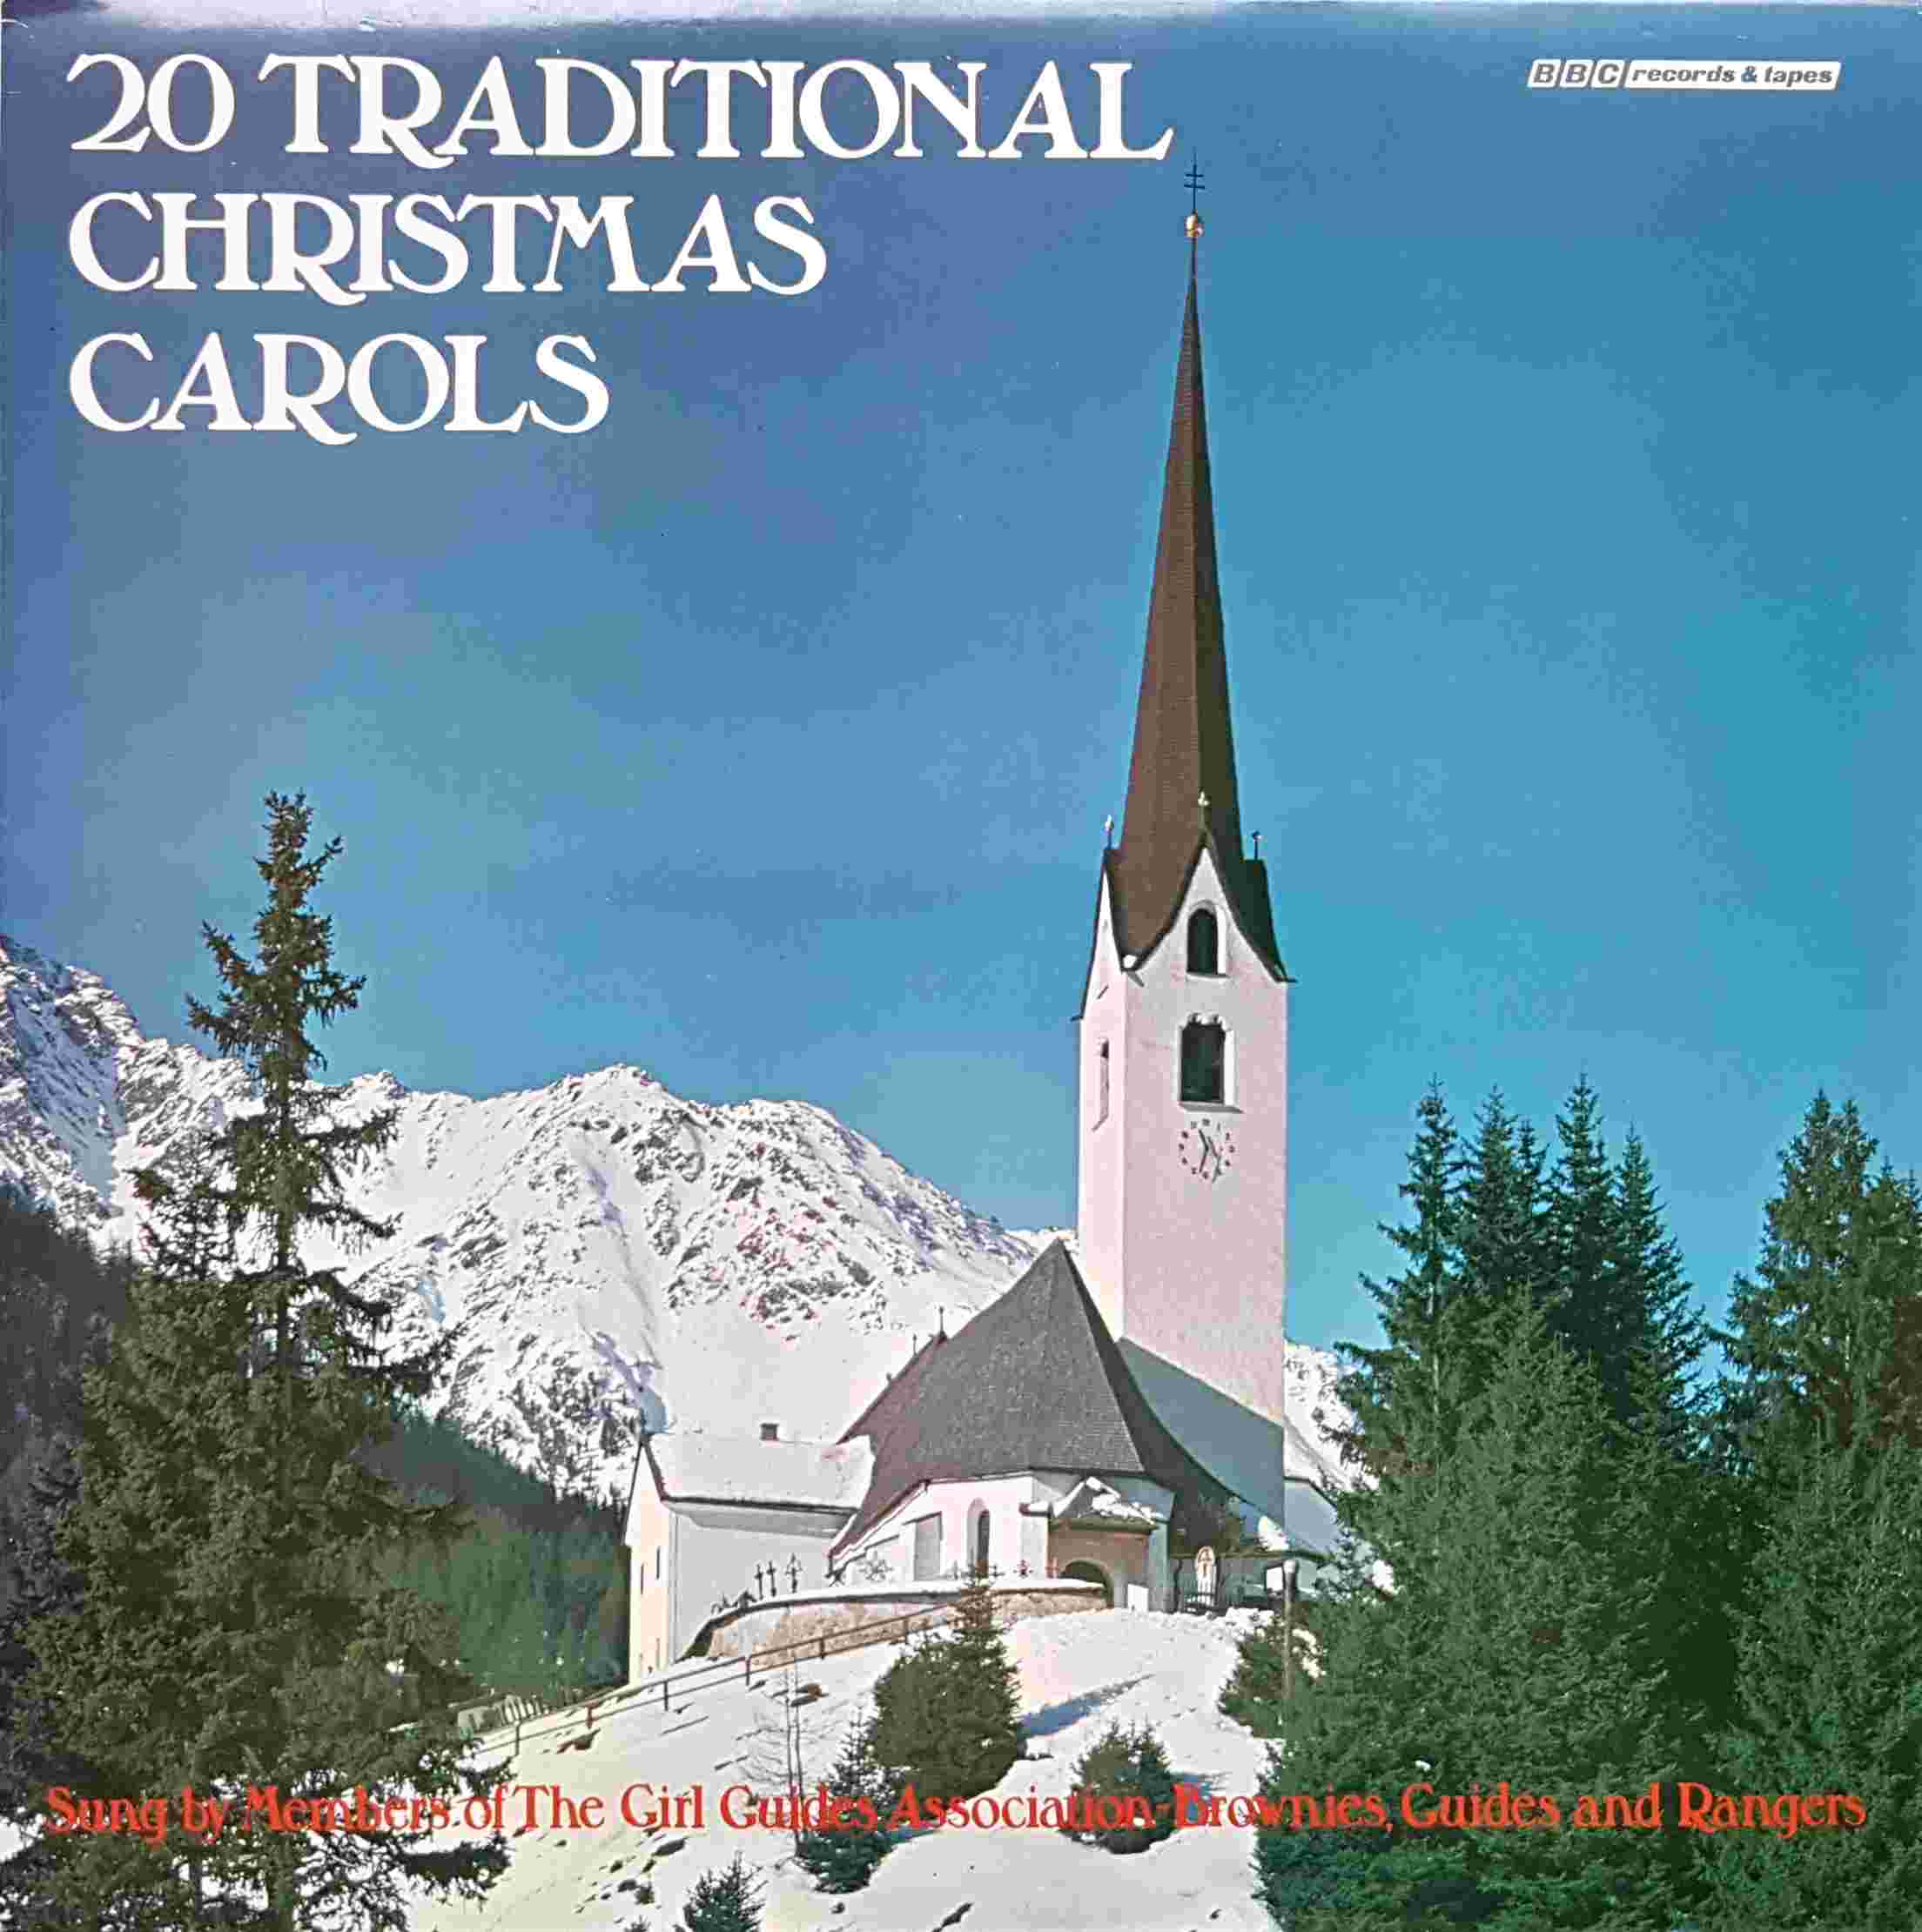 Picture of REC 288 20 traditional Christmas carols by artist Various from the BBC albums - Records and Tapes library